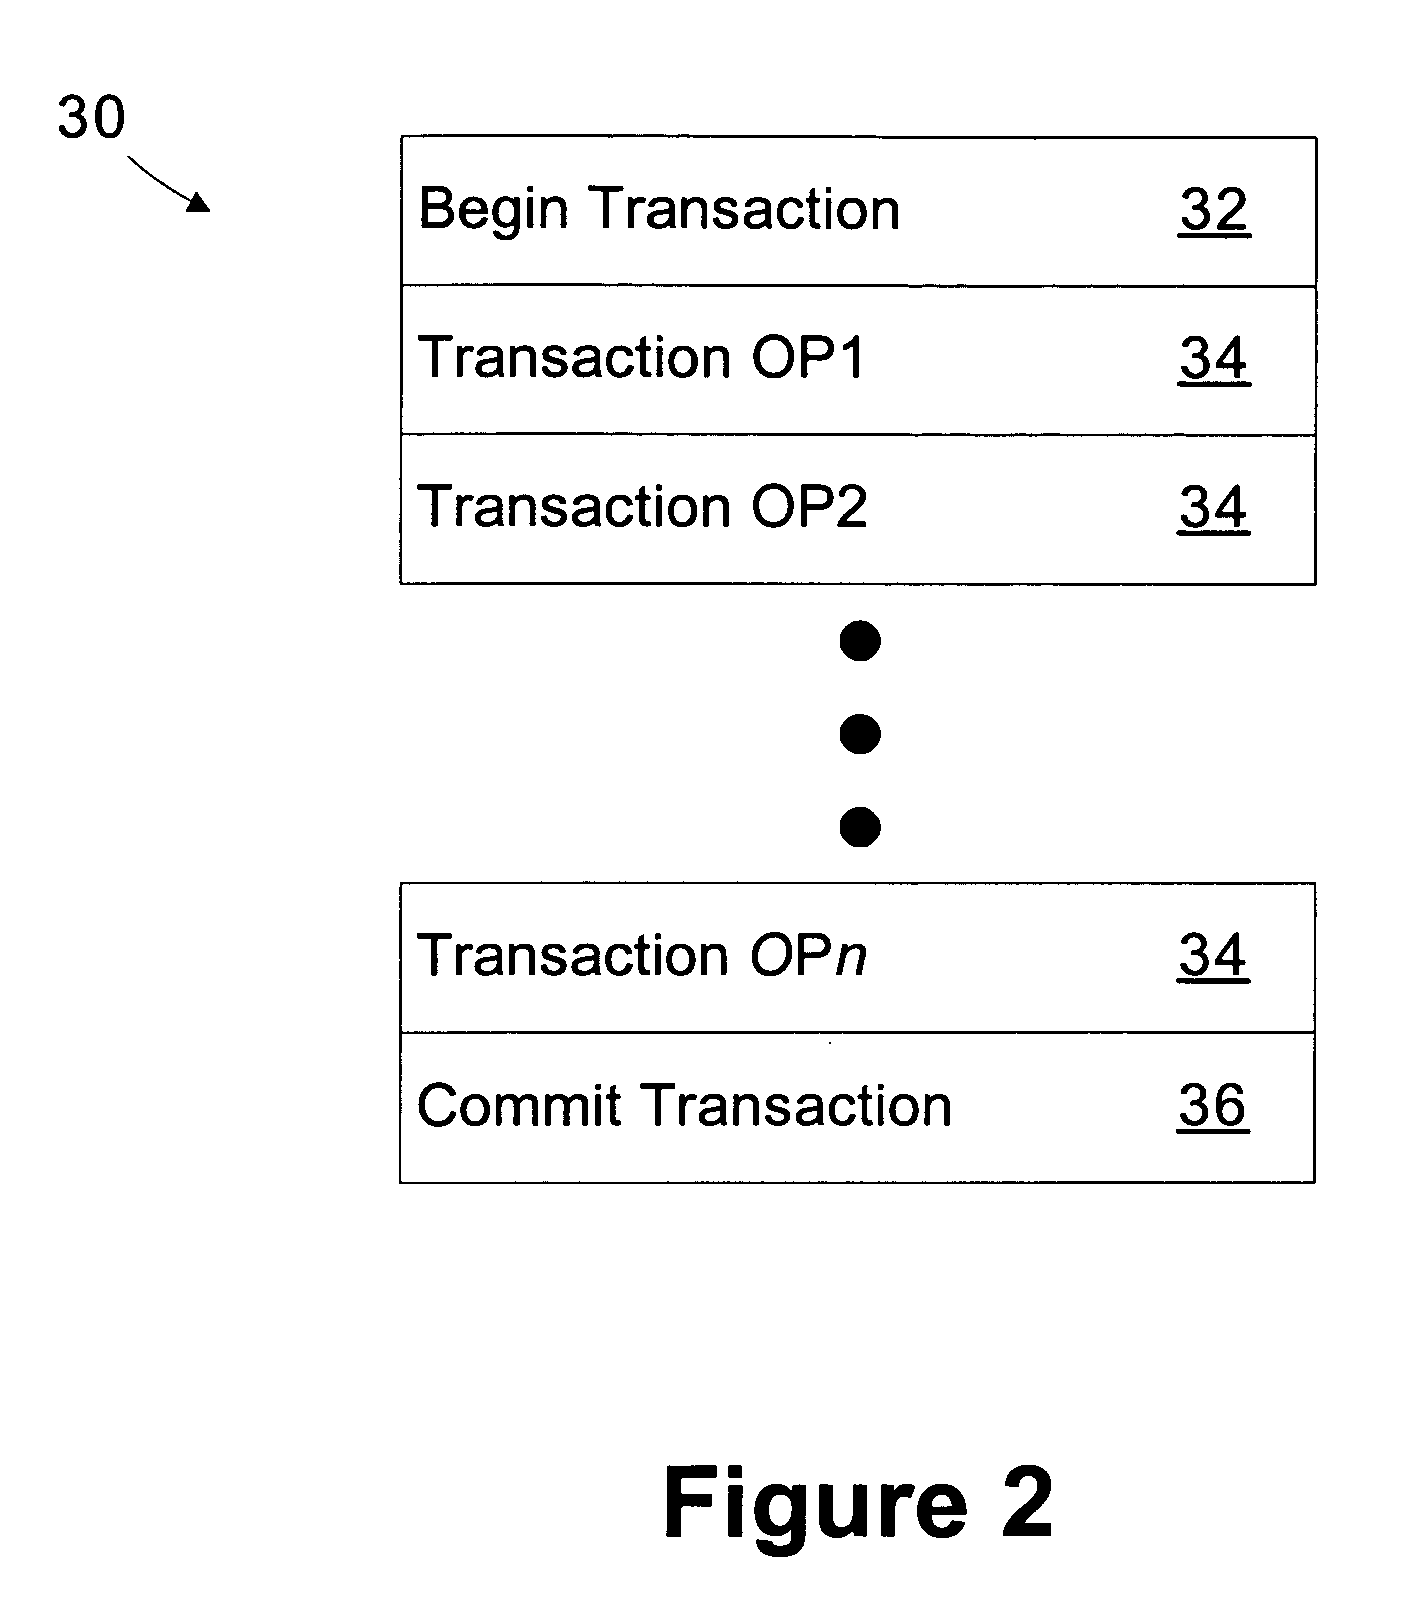 Method and apparatus for communicating transactions between an industrial controller and a programming interface